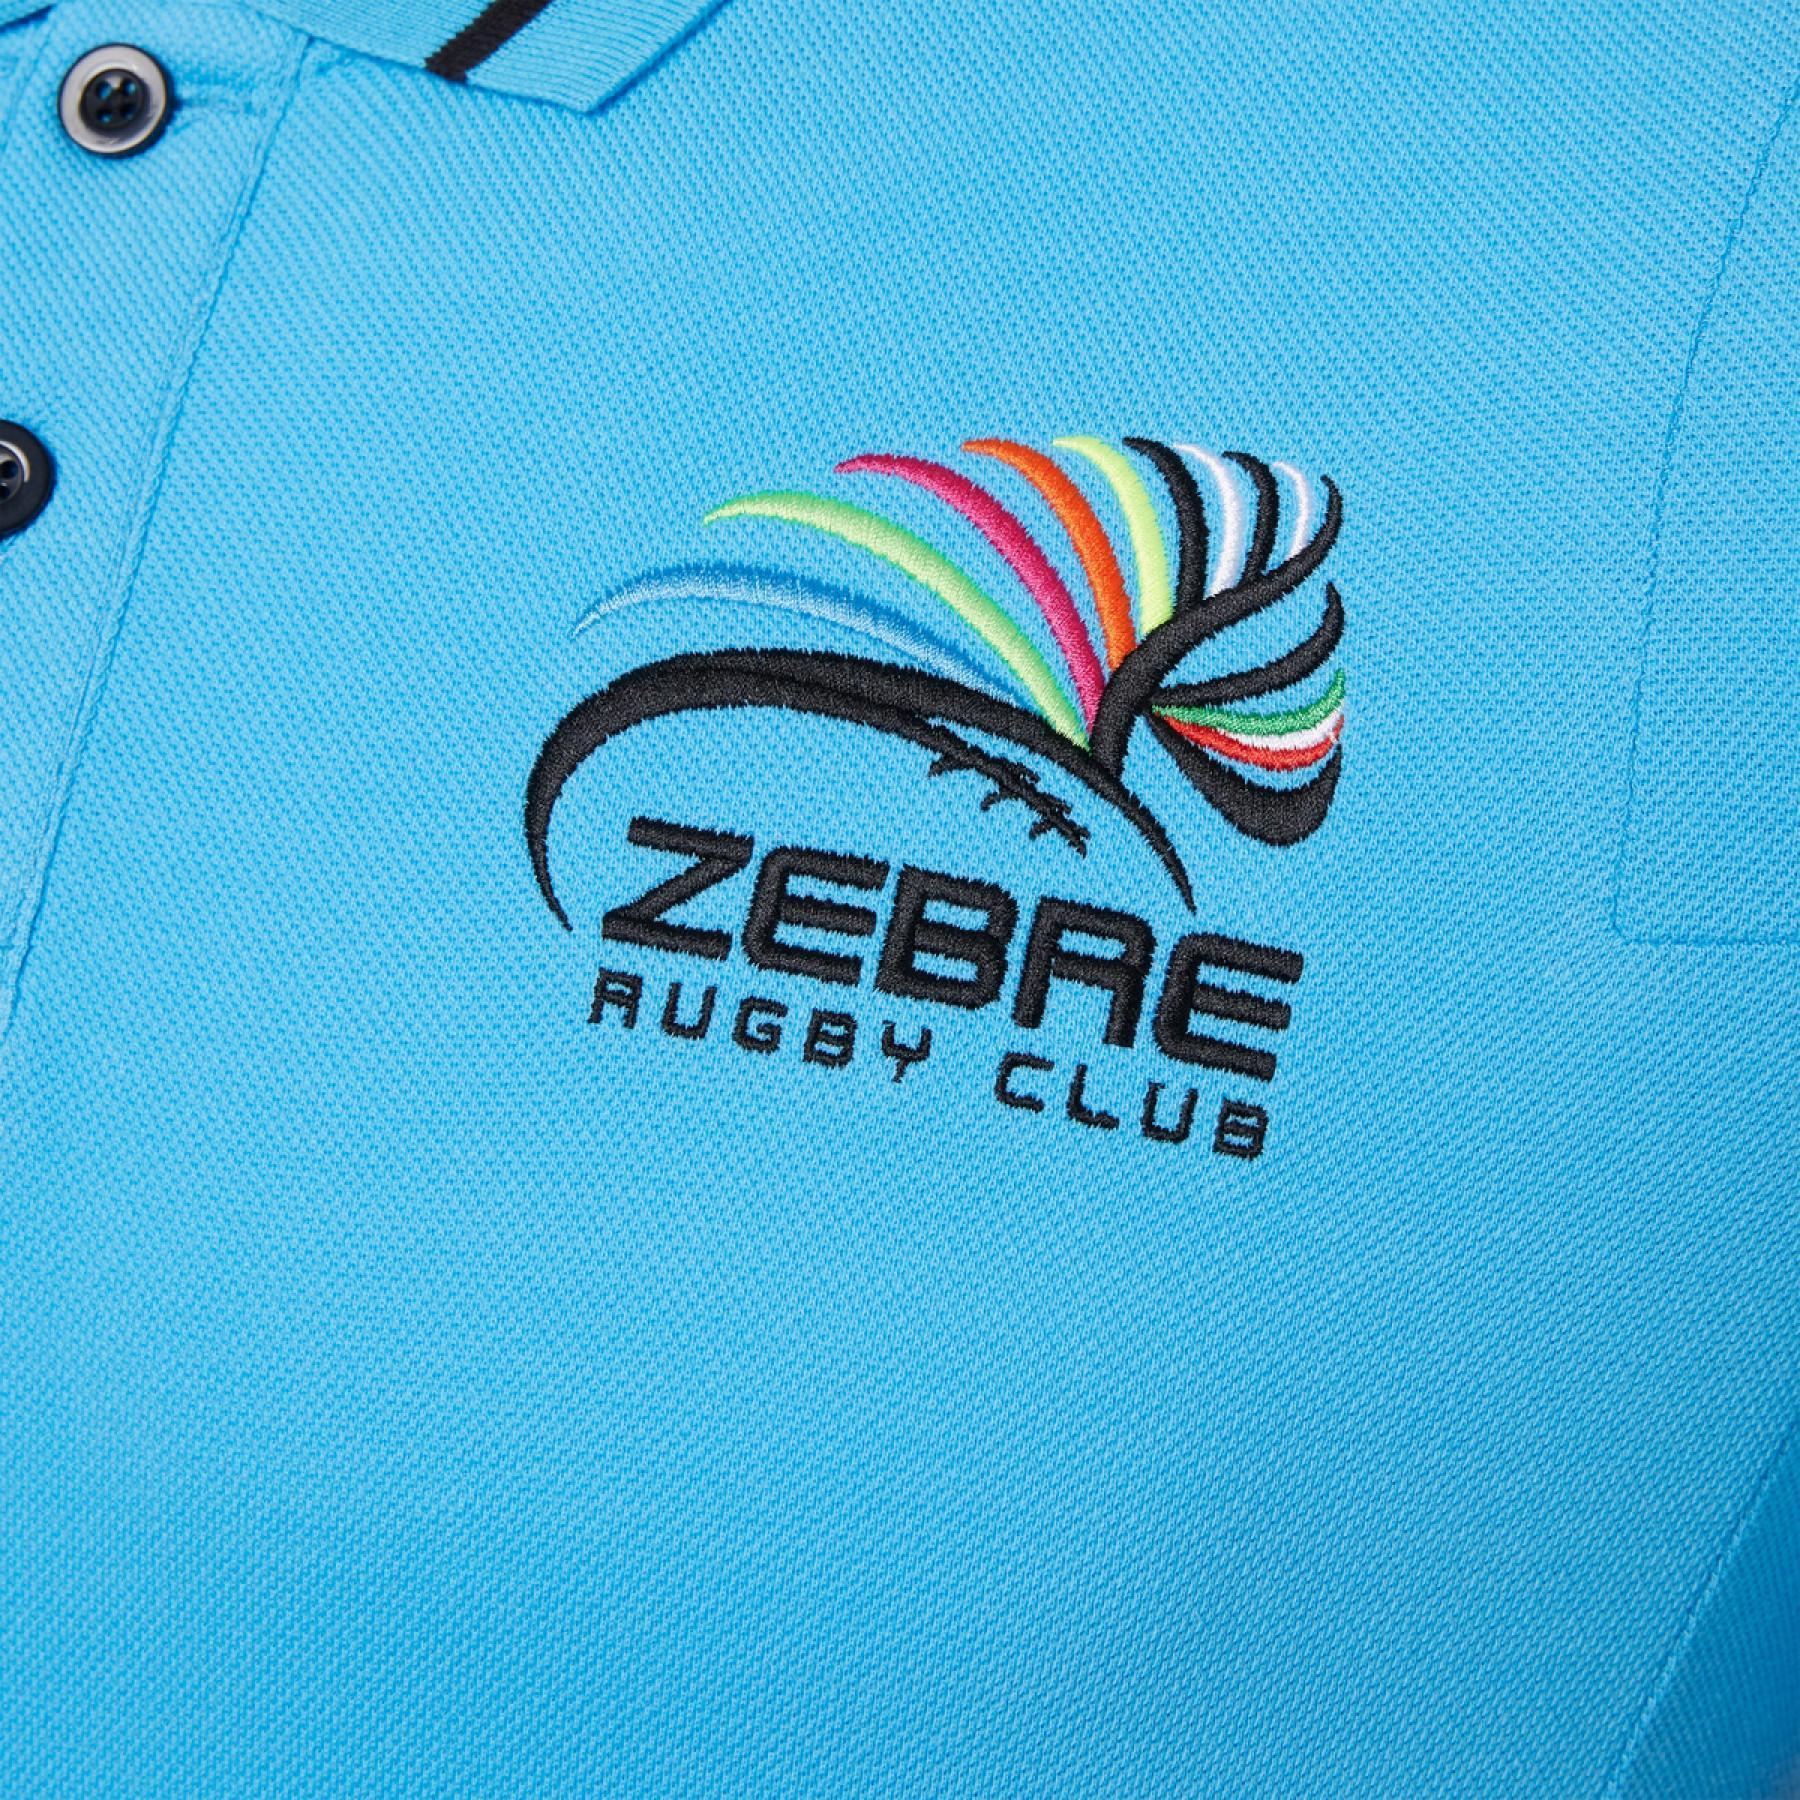 Polo voyage zebre rugby 2020/21